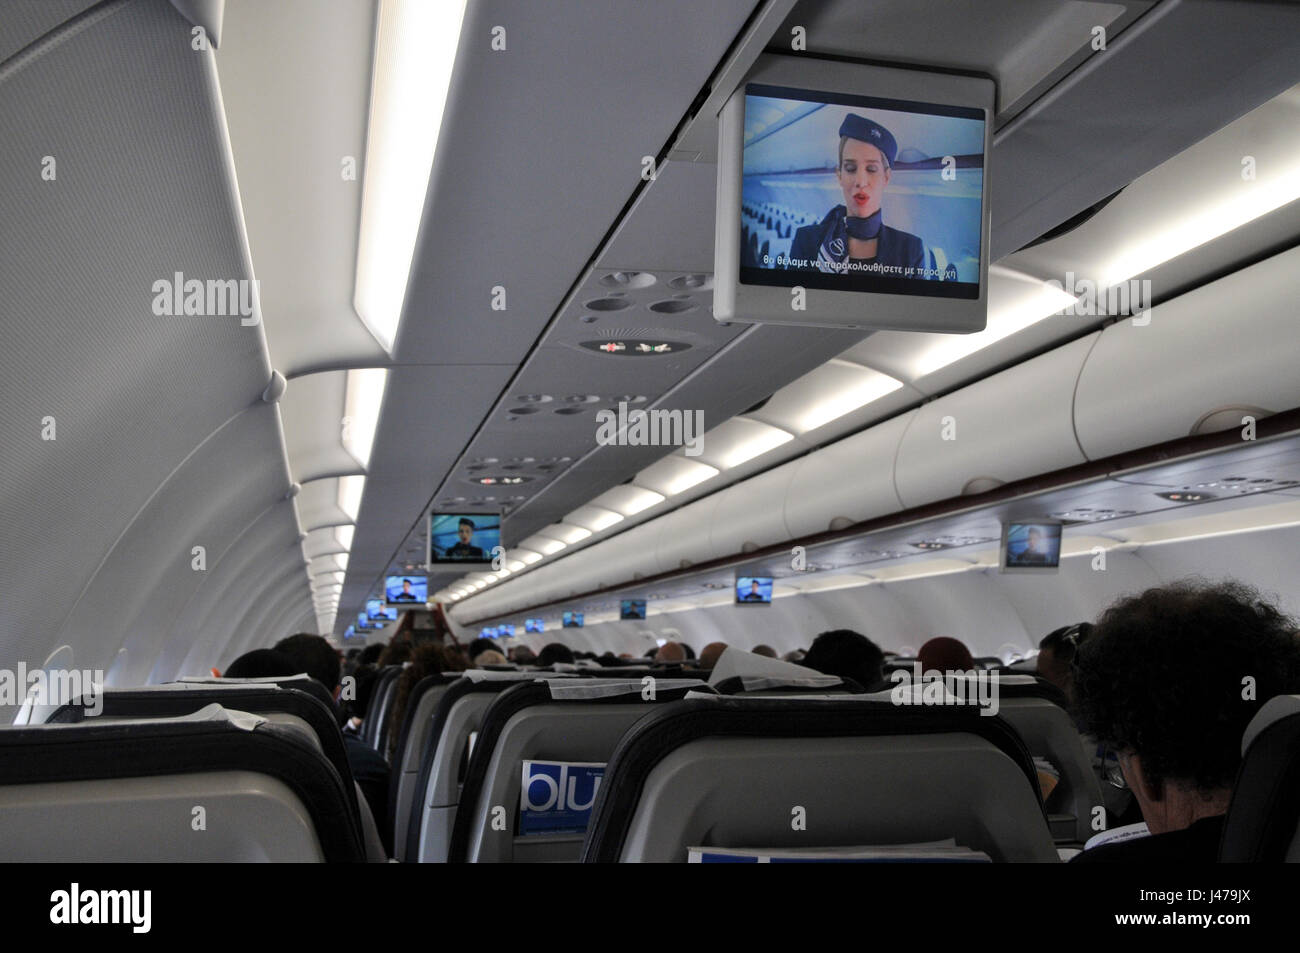 Interior Of The Cabin Of An Aegean Airlines Airbus A320 200